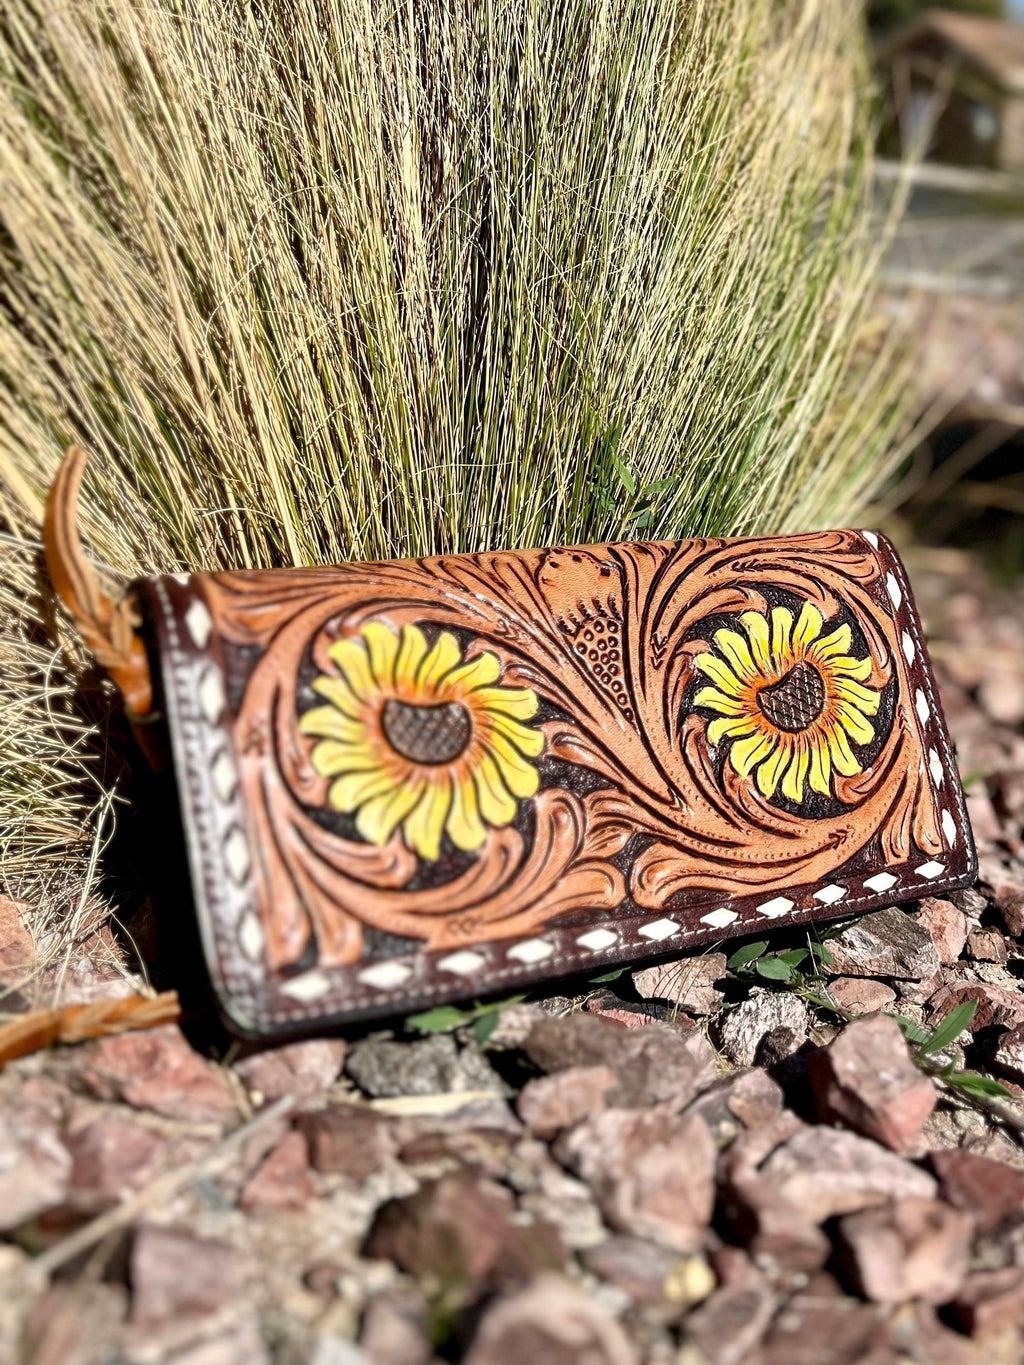 Introducing the Big Ole' Sunflower Wallet--the perfect companion for going out on the town! With an eye-catching floral tooling and a white whip stitch, you'll be stoppin' traffic all night. Brown leather and ready for a wristlet, crossbody, or wallet, this 4"X8" beauty has multiple credit card slots and compartments to keep your stuff safe and secure. So go ahead--make a style statement!